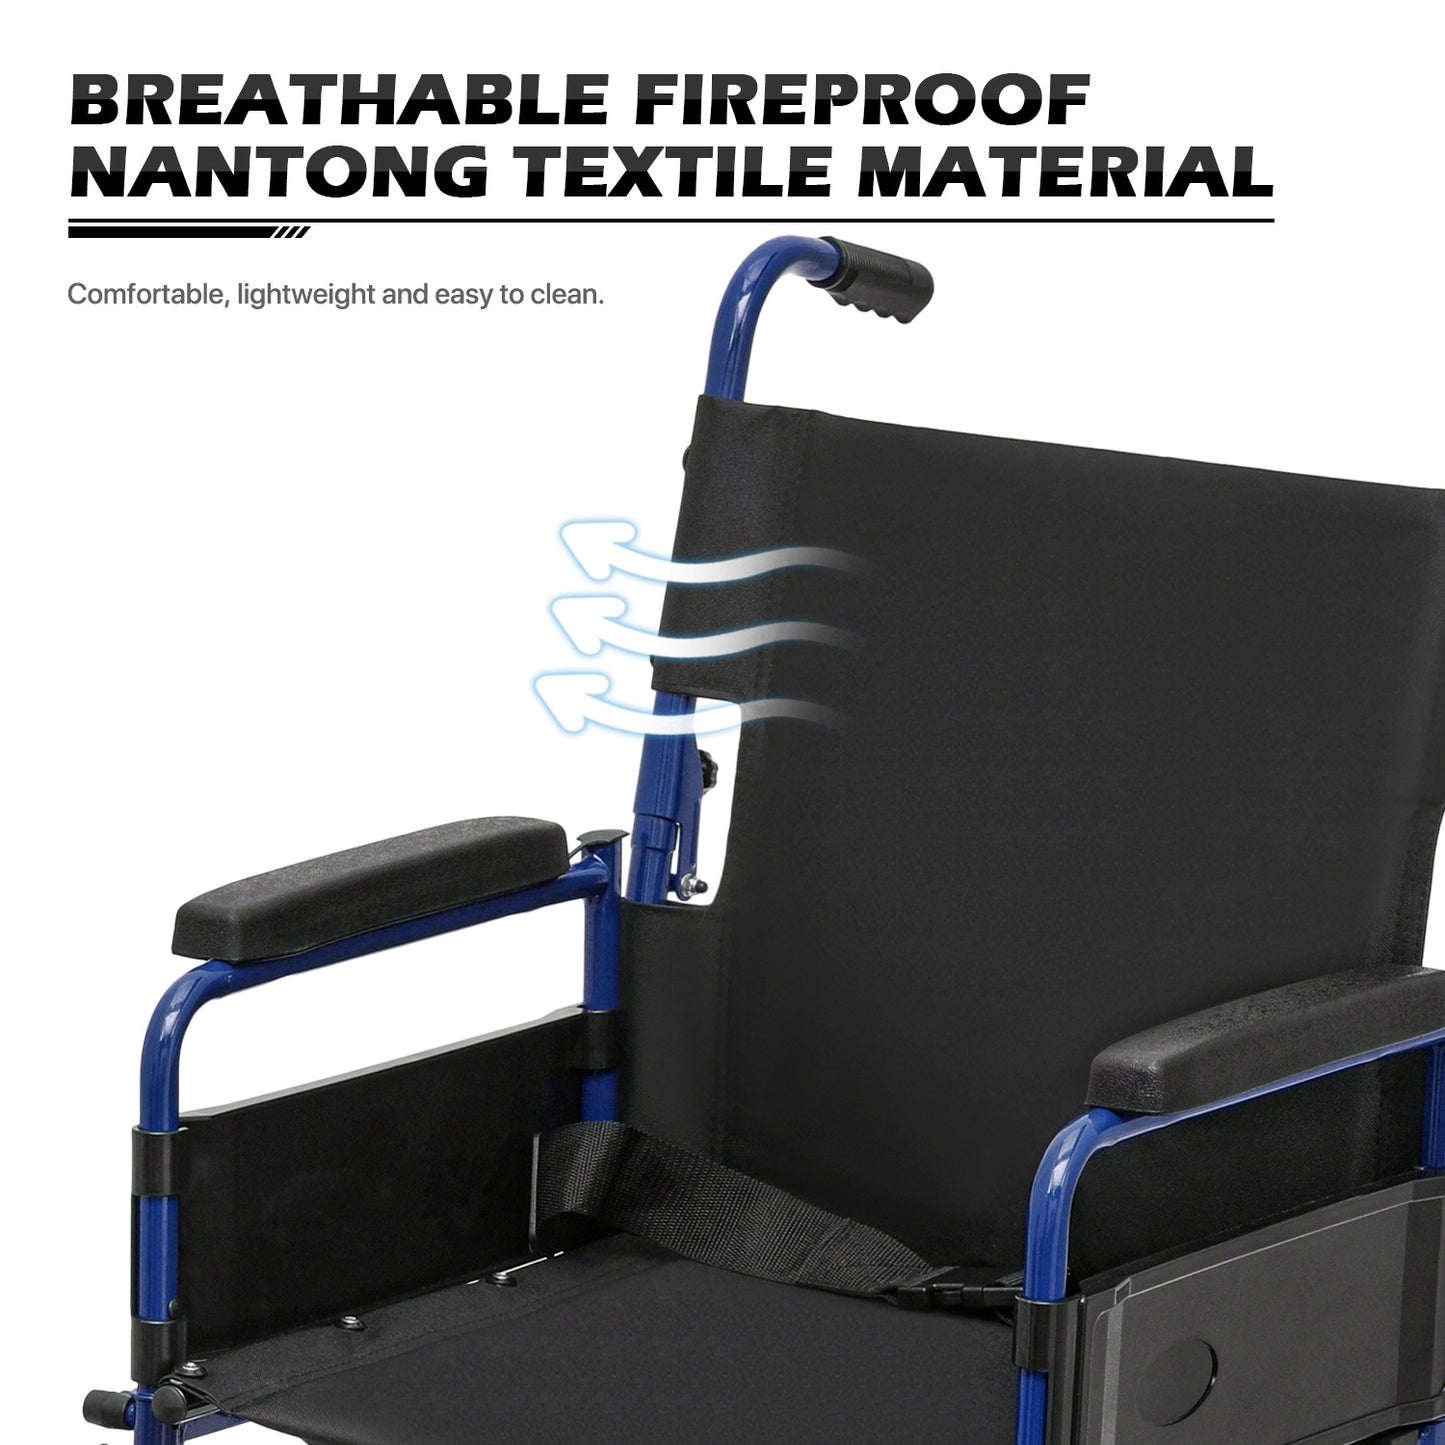 Transport Wheelchair - FDA Approved, PU Paded Armrest, Blue